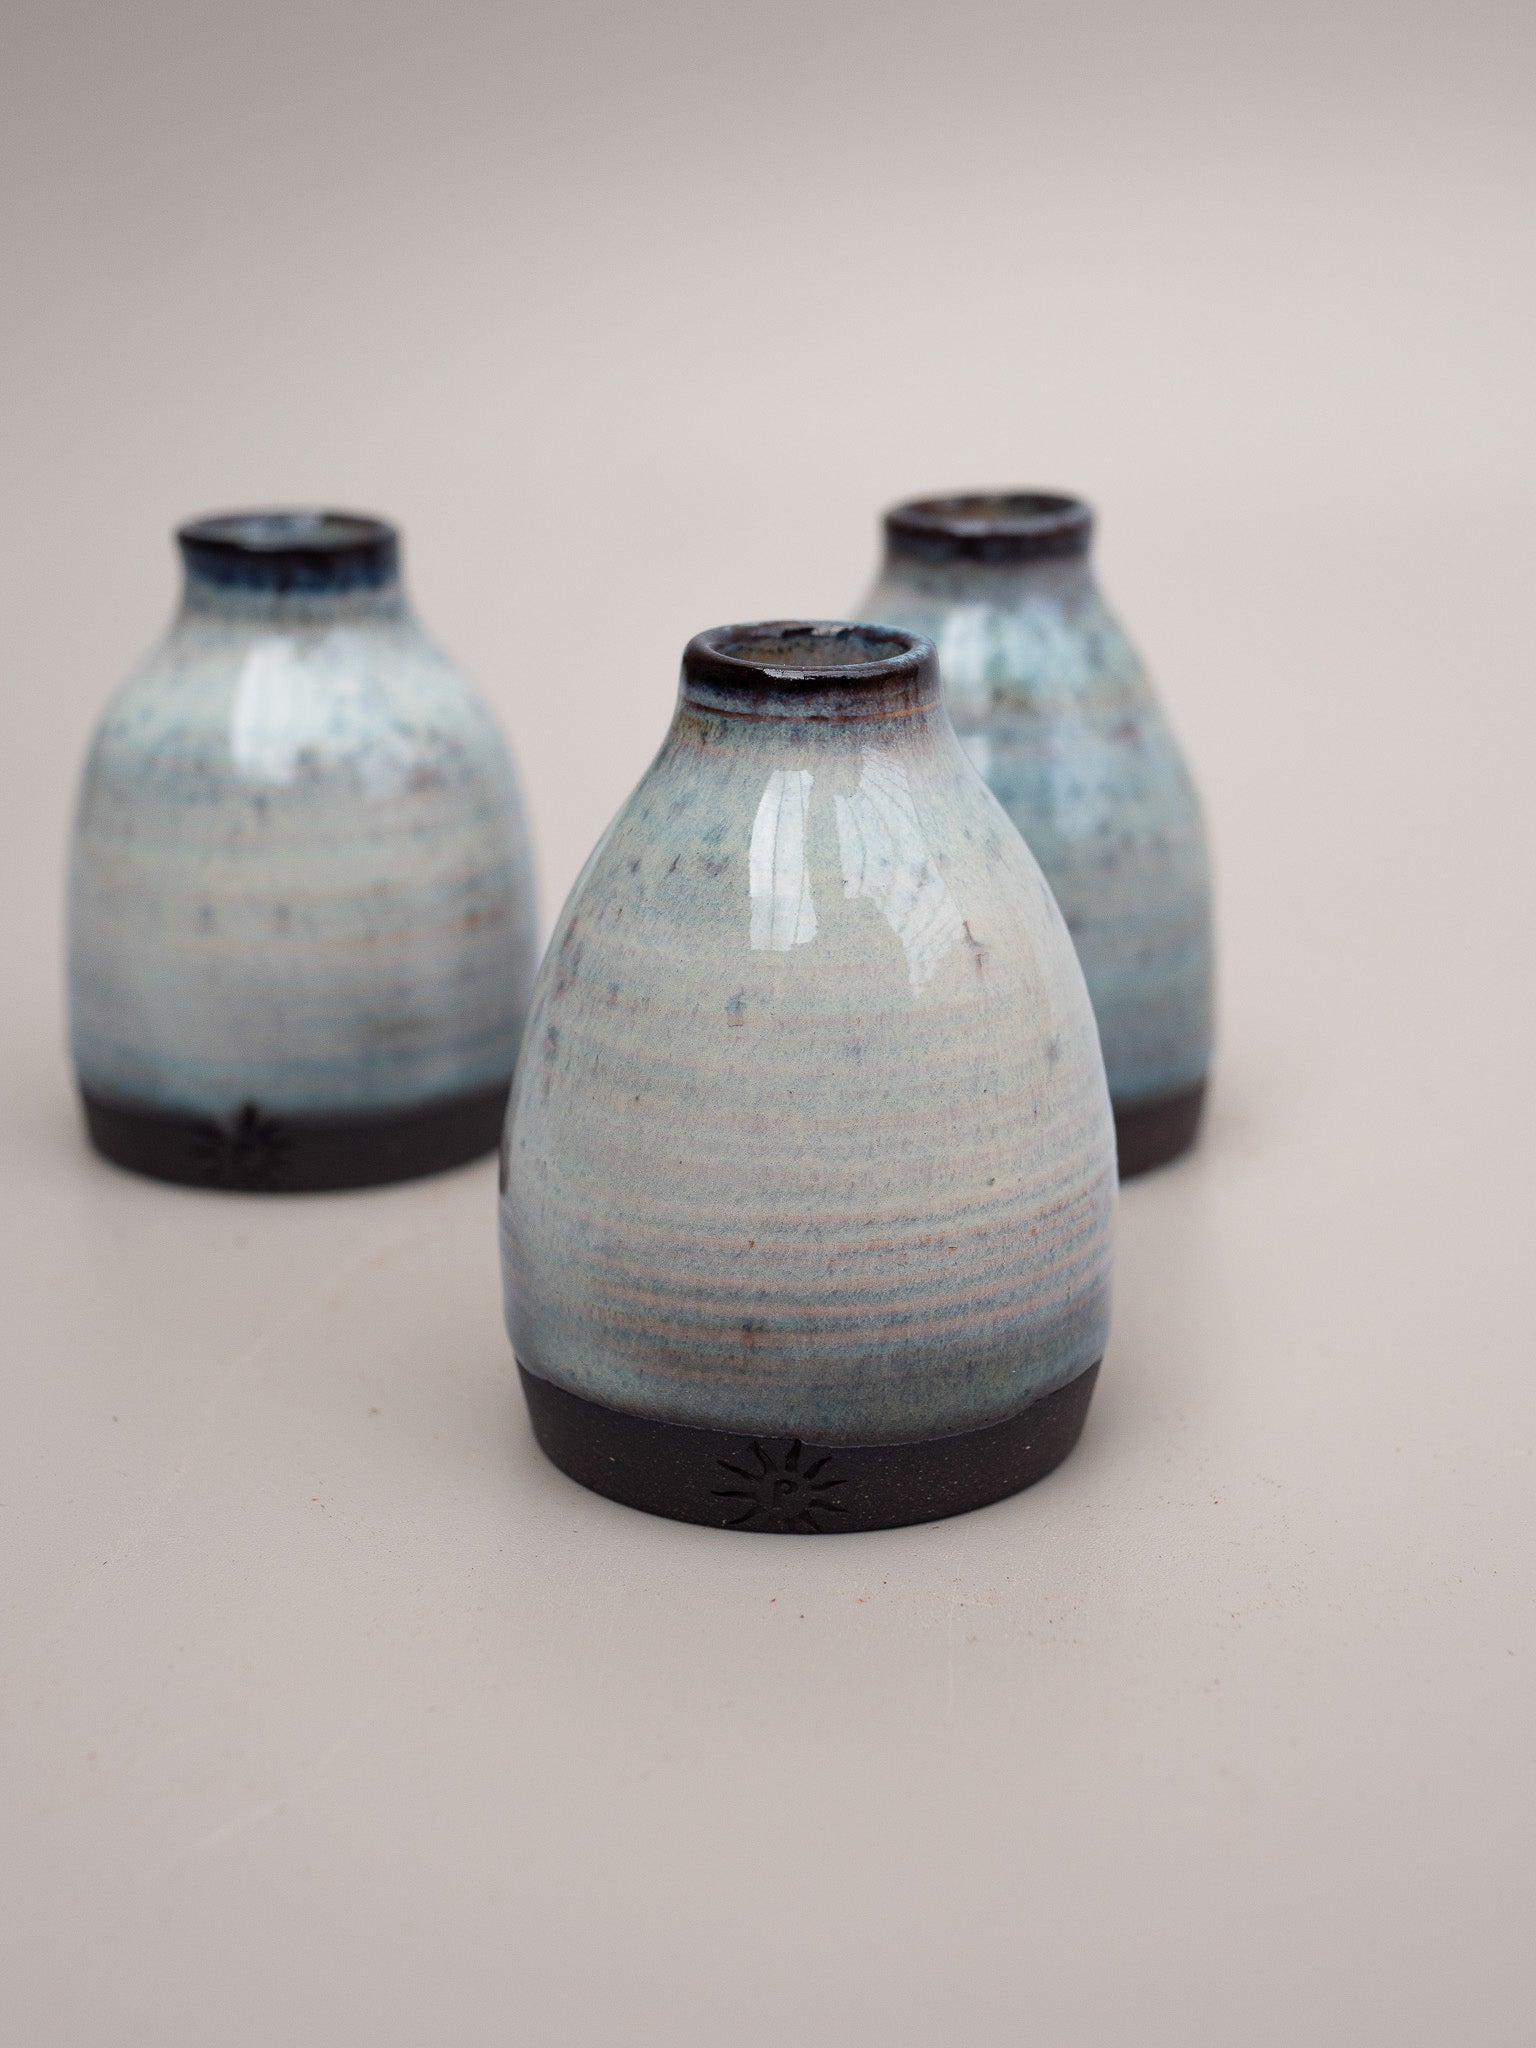 Small bud vases thrown in stoneware clay